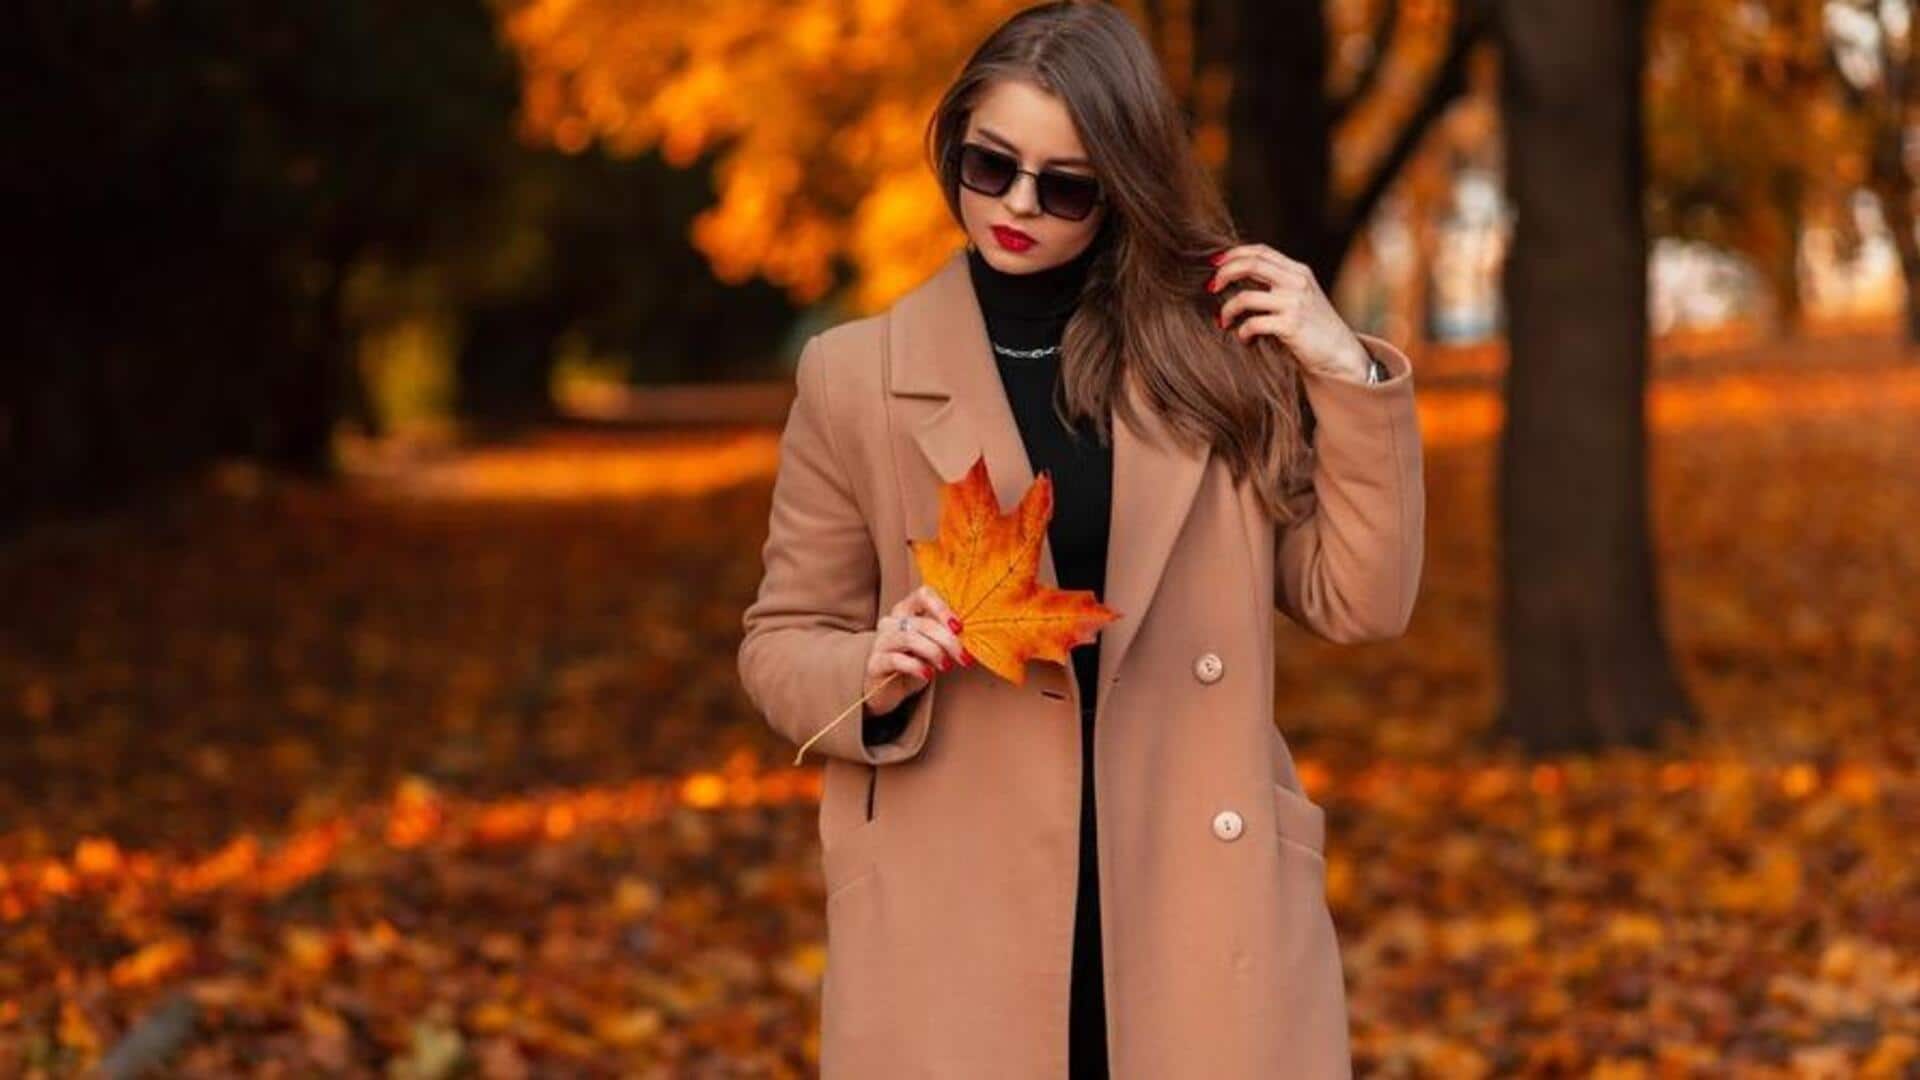 Embrace autumn's palette in your wardrobe